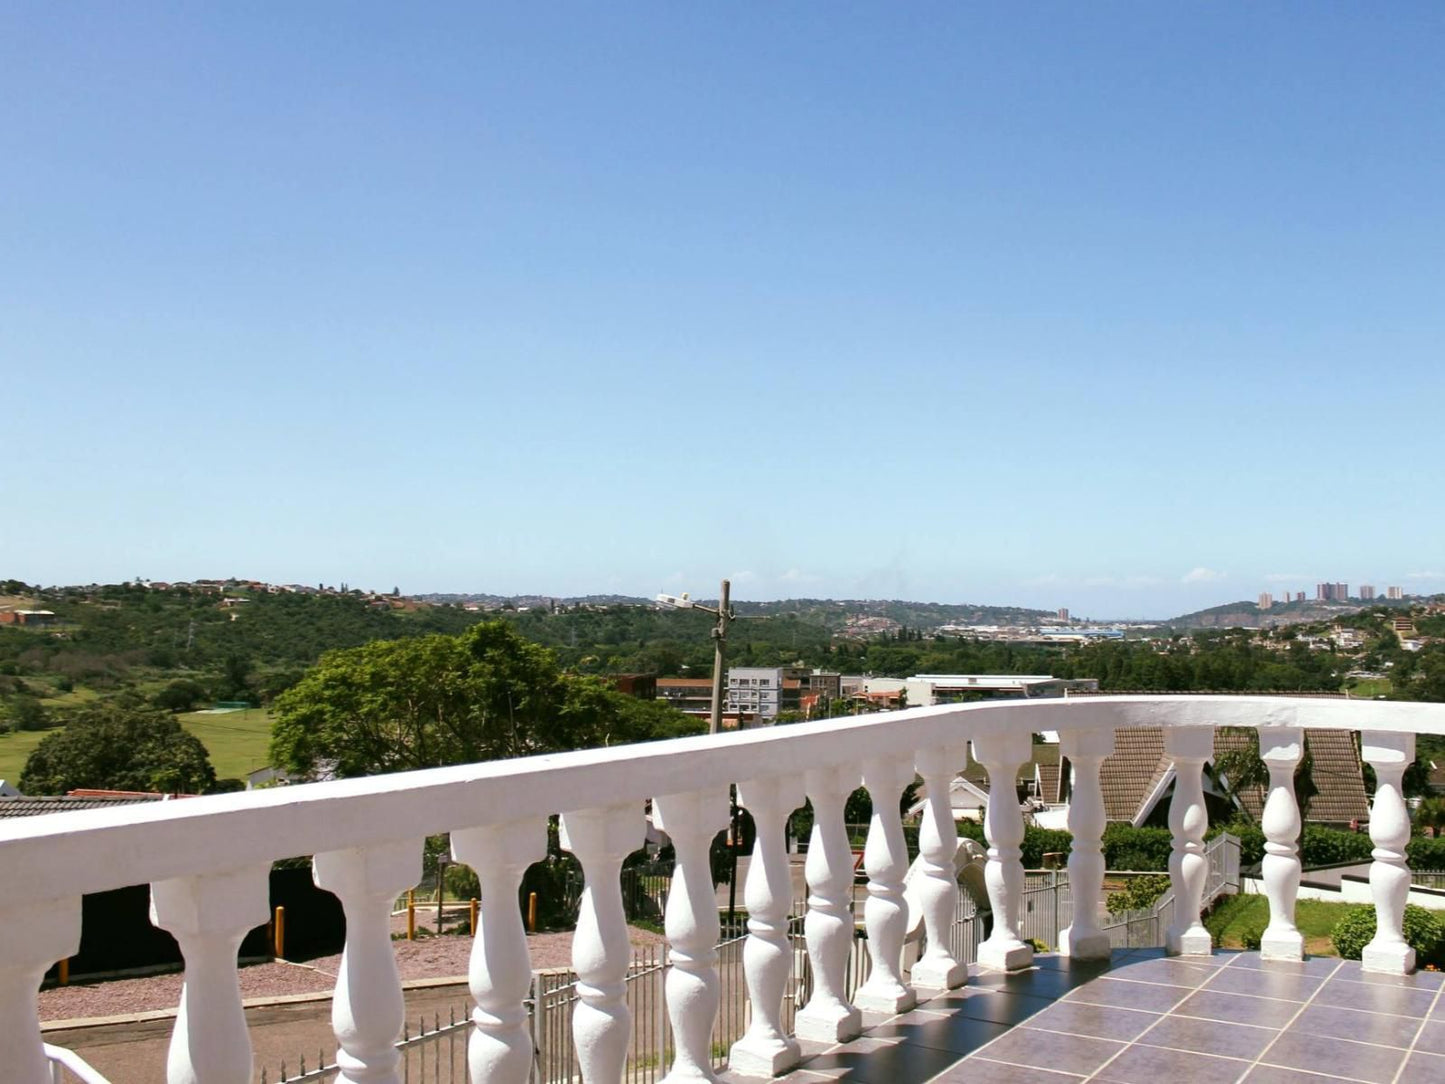 Goodwill Manor Boutique Guesthouse Reservoir Hills Durban Kwazulu Natal South Africa Balcony, Architecture